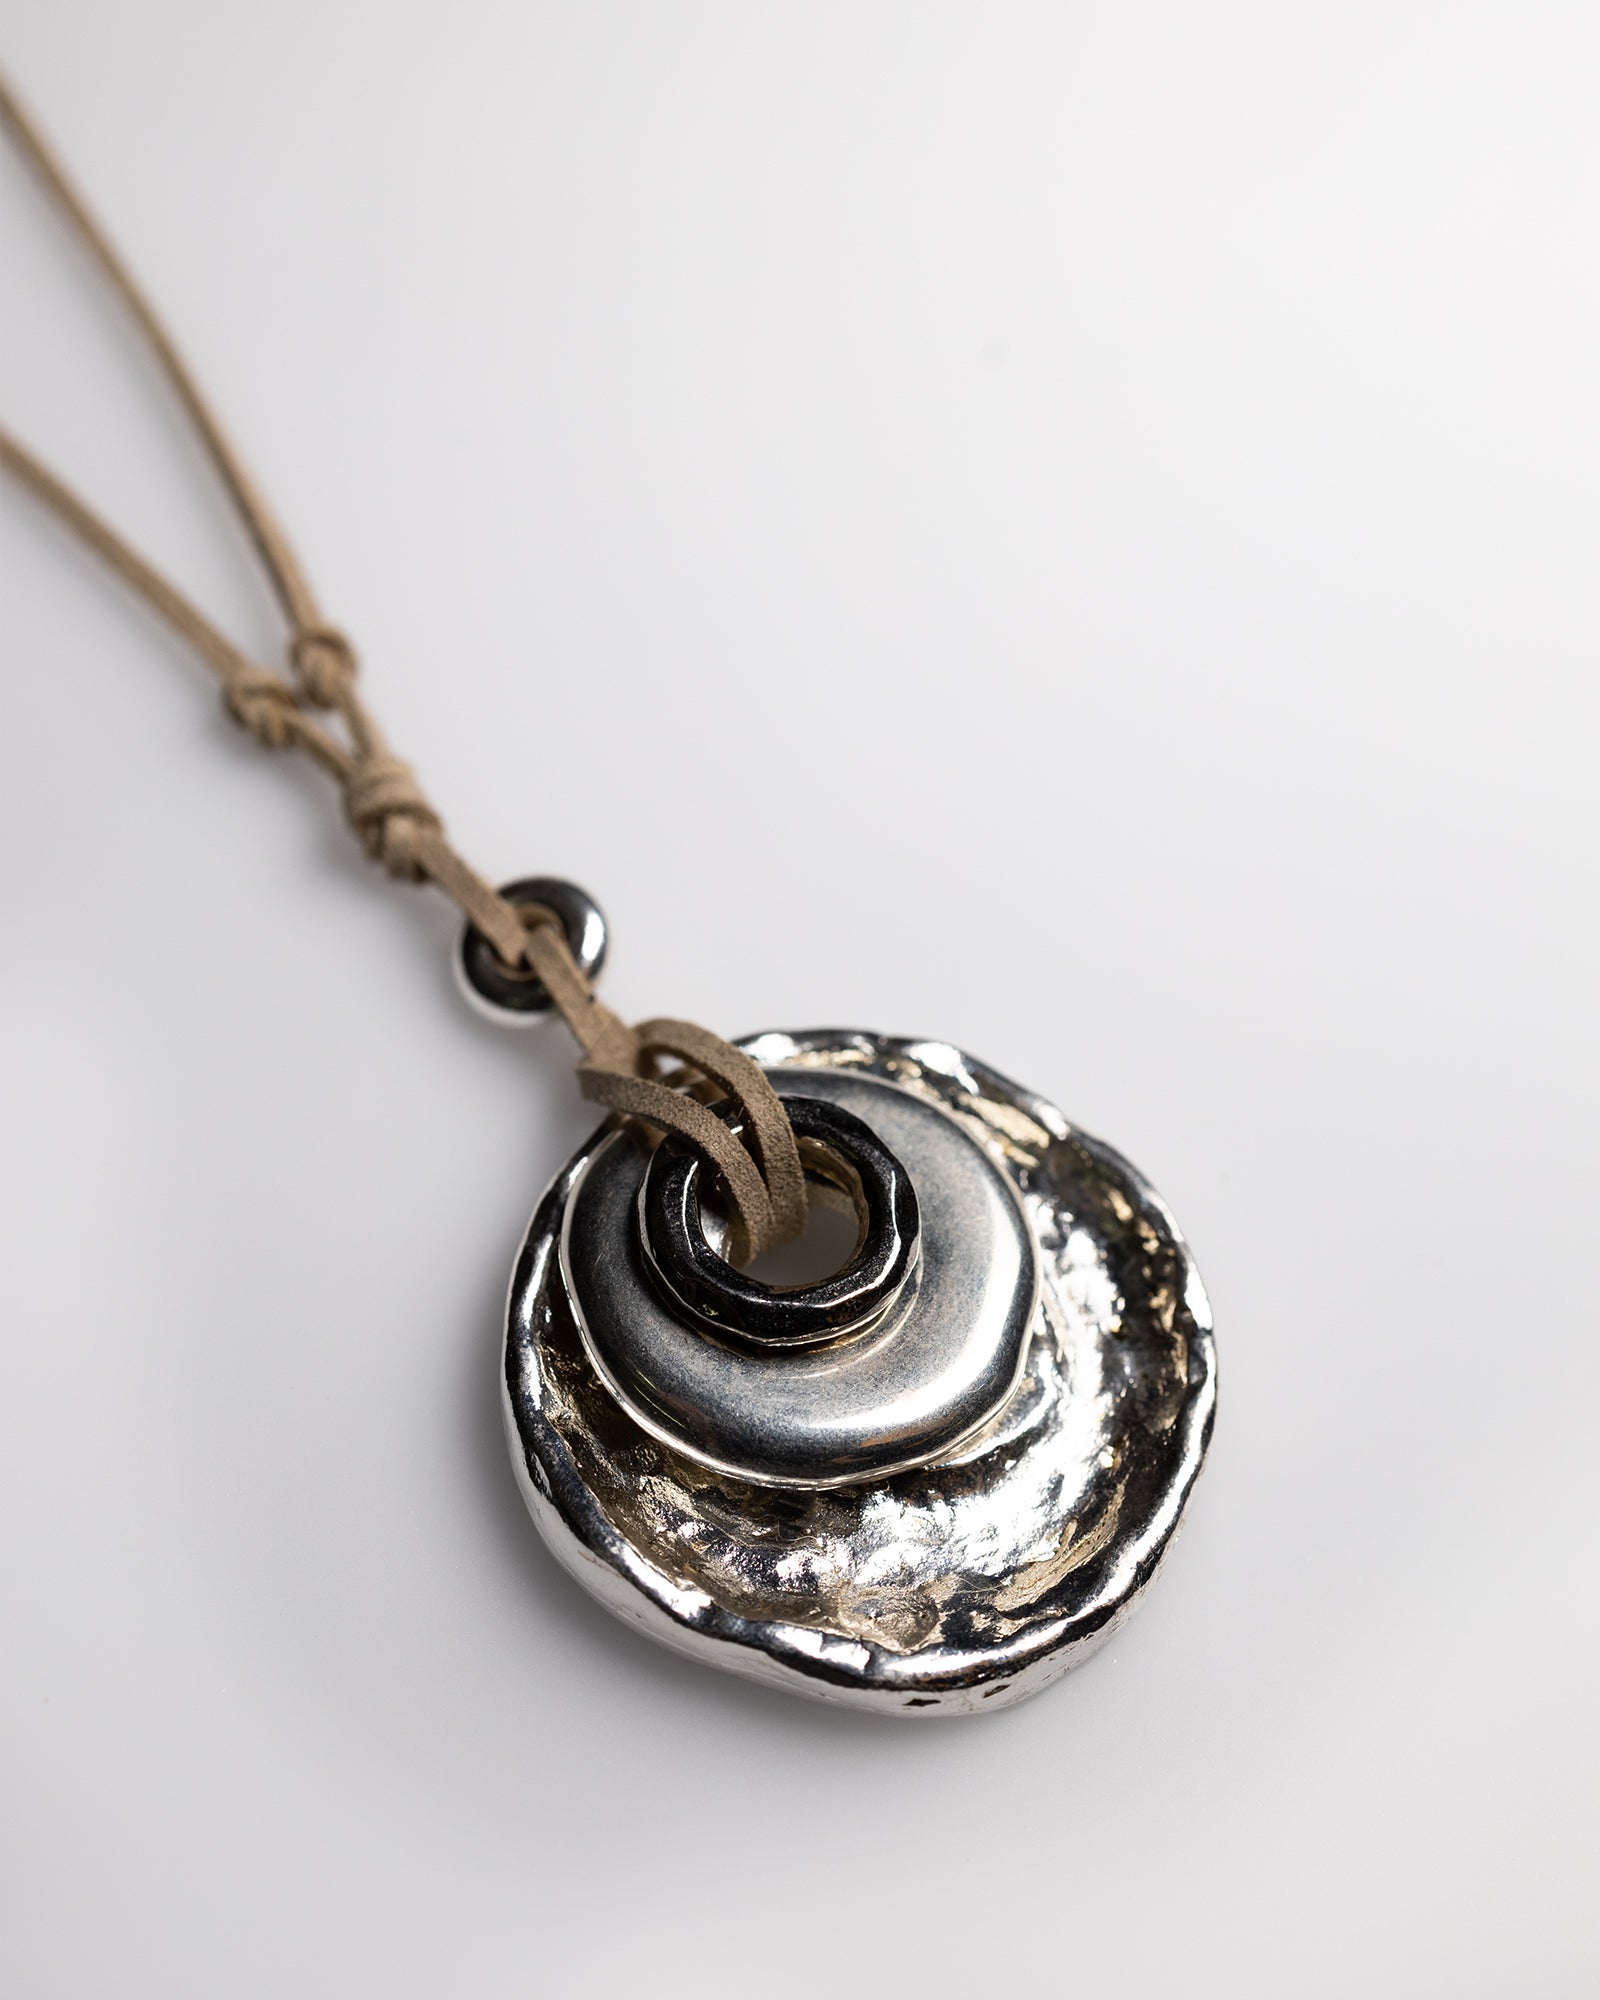 90s Vintage Archive Statement Pendant Necklace in Silver